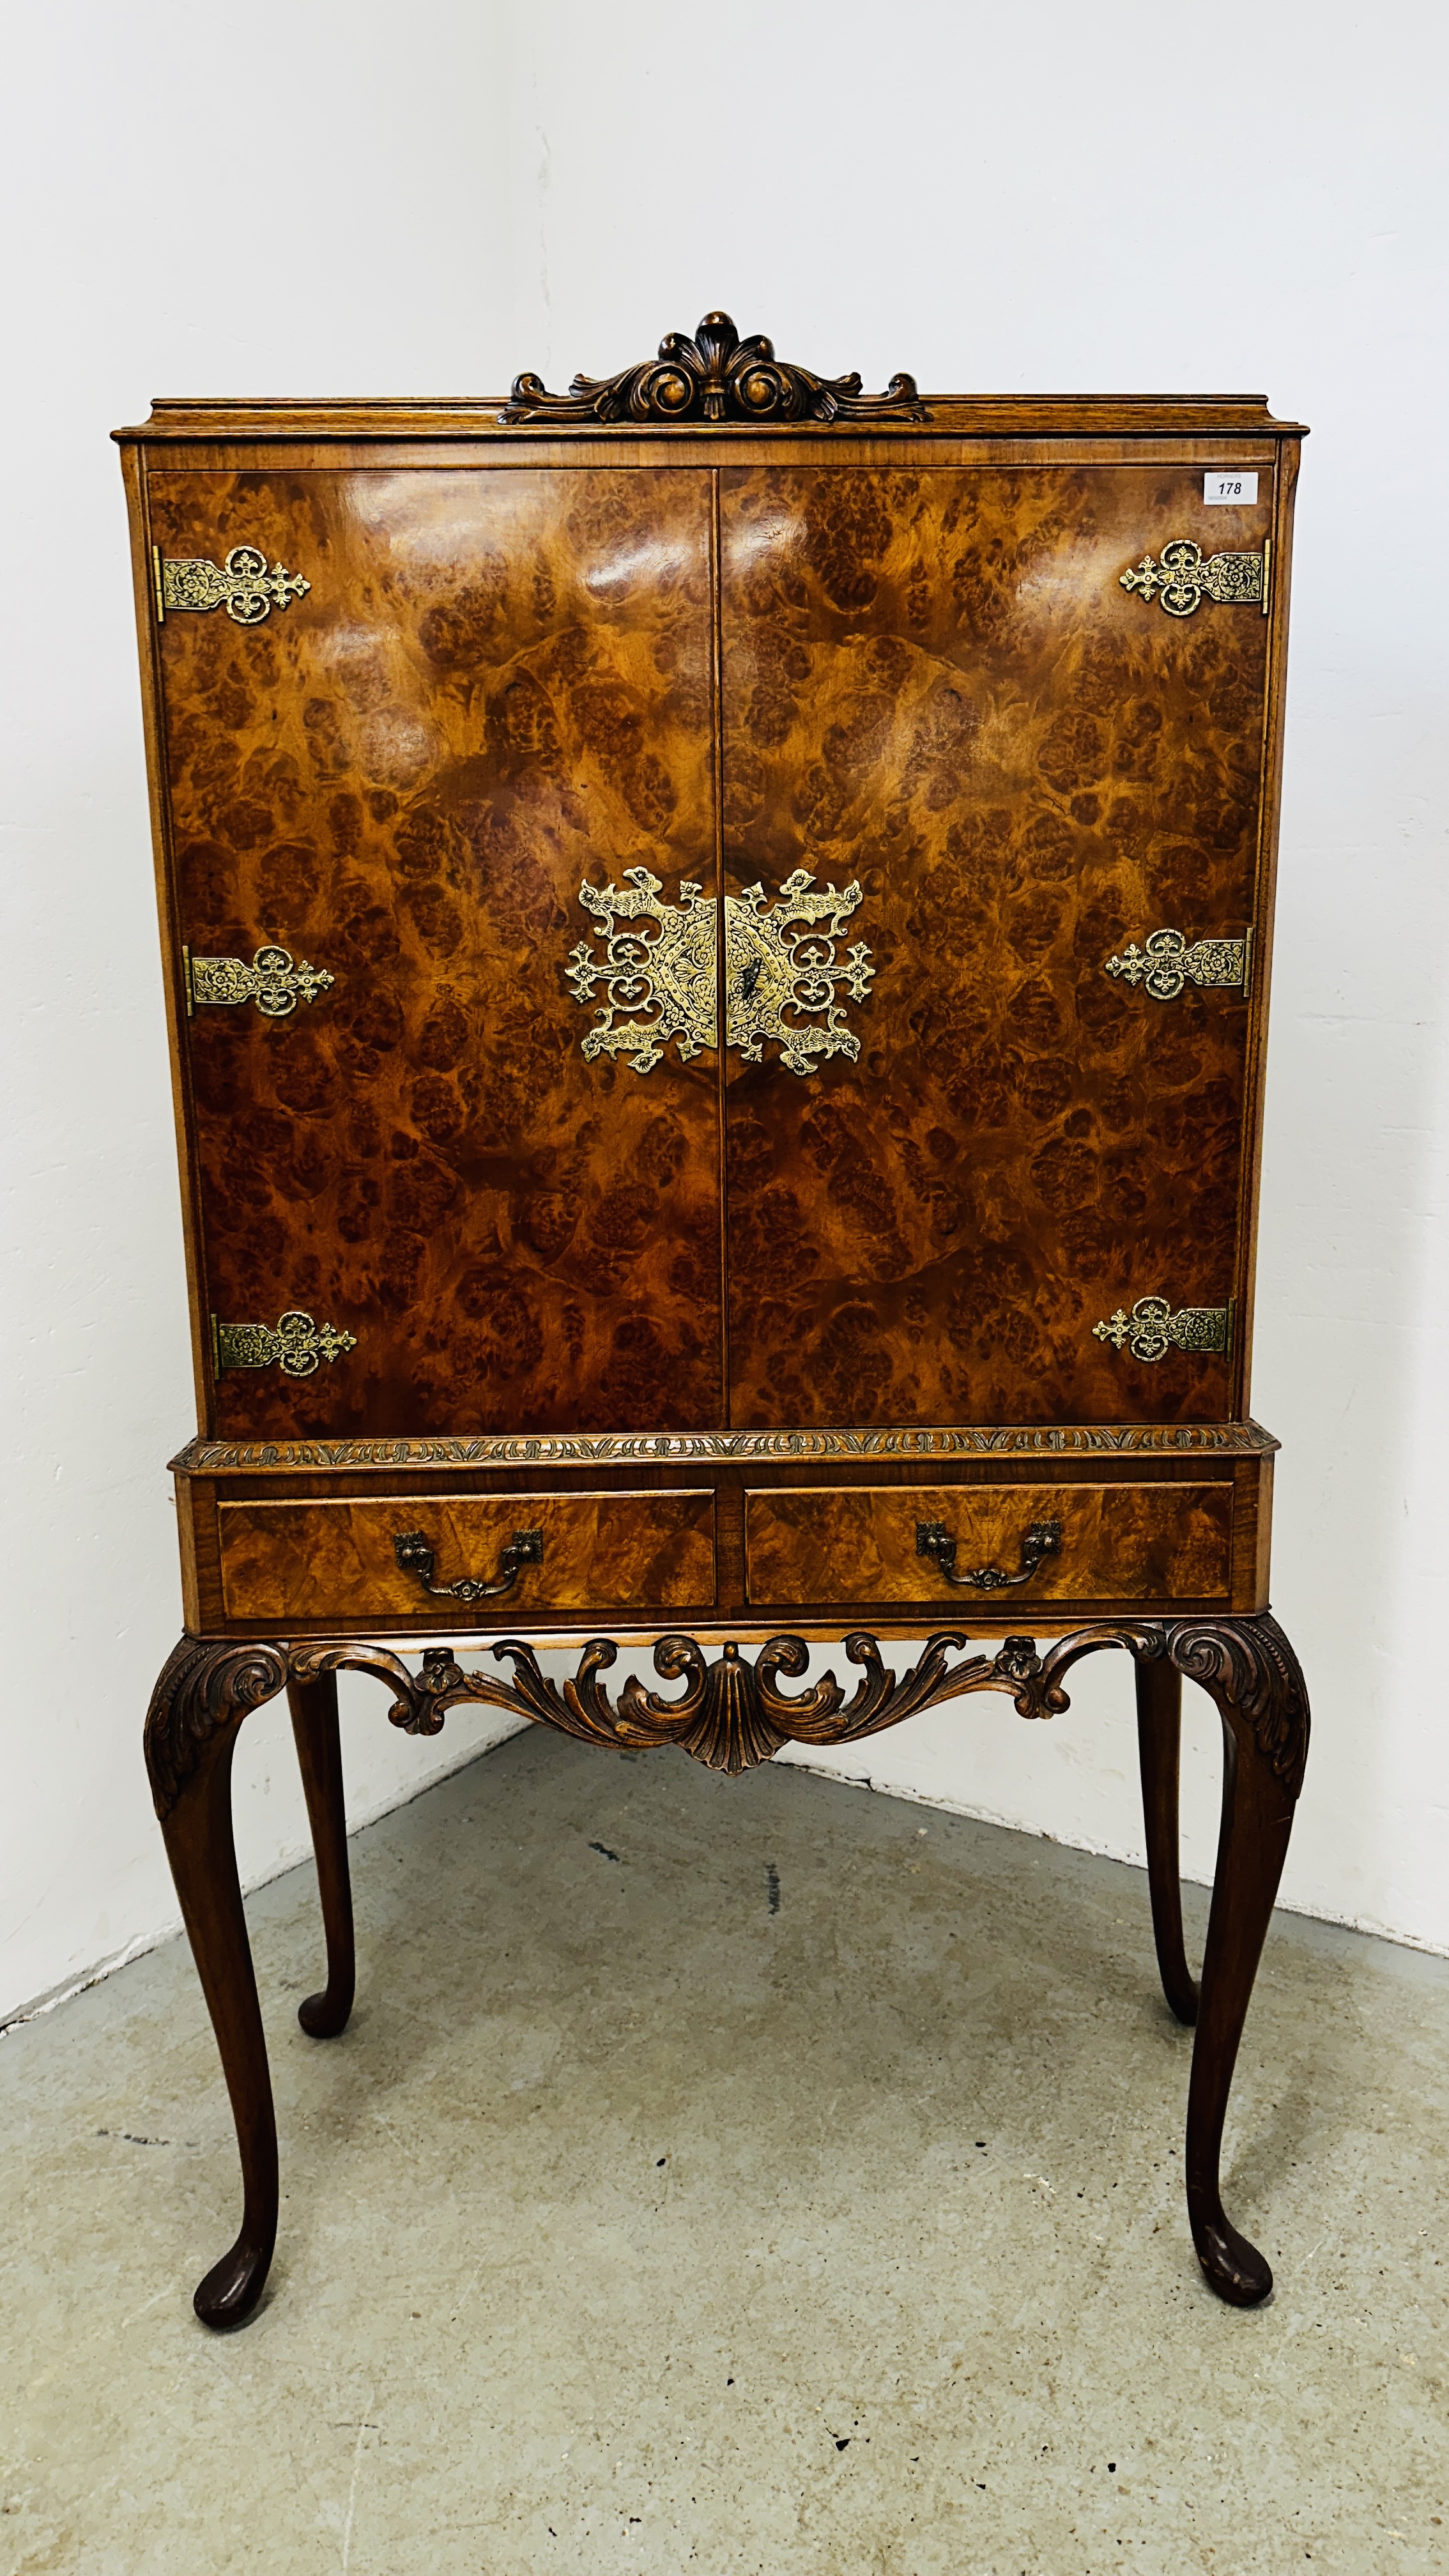 A CONTINENTAL STYLE REPRODUCTION WALNUT FINISH DRINKS CABINET WITH ORNATE BRASS EMBELLISHMENTS,